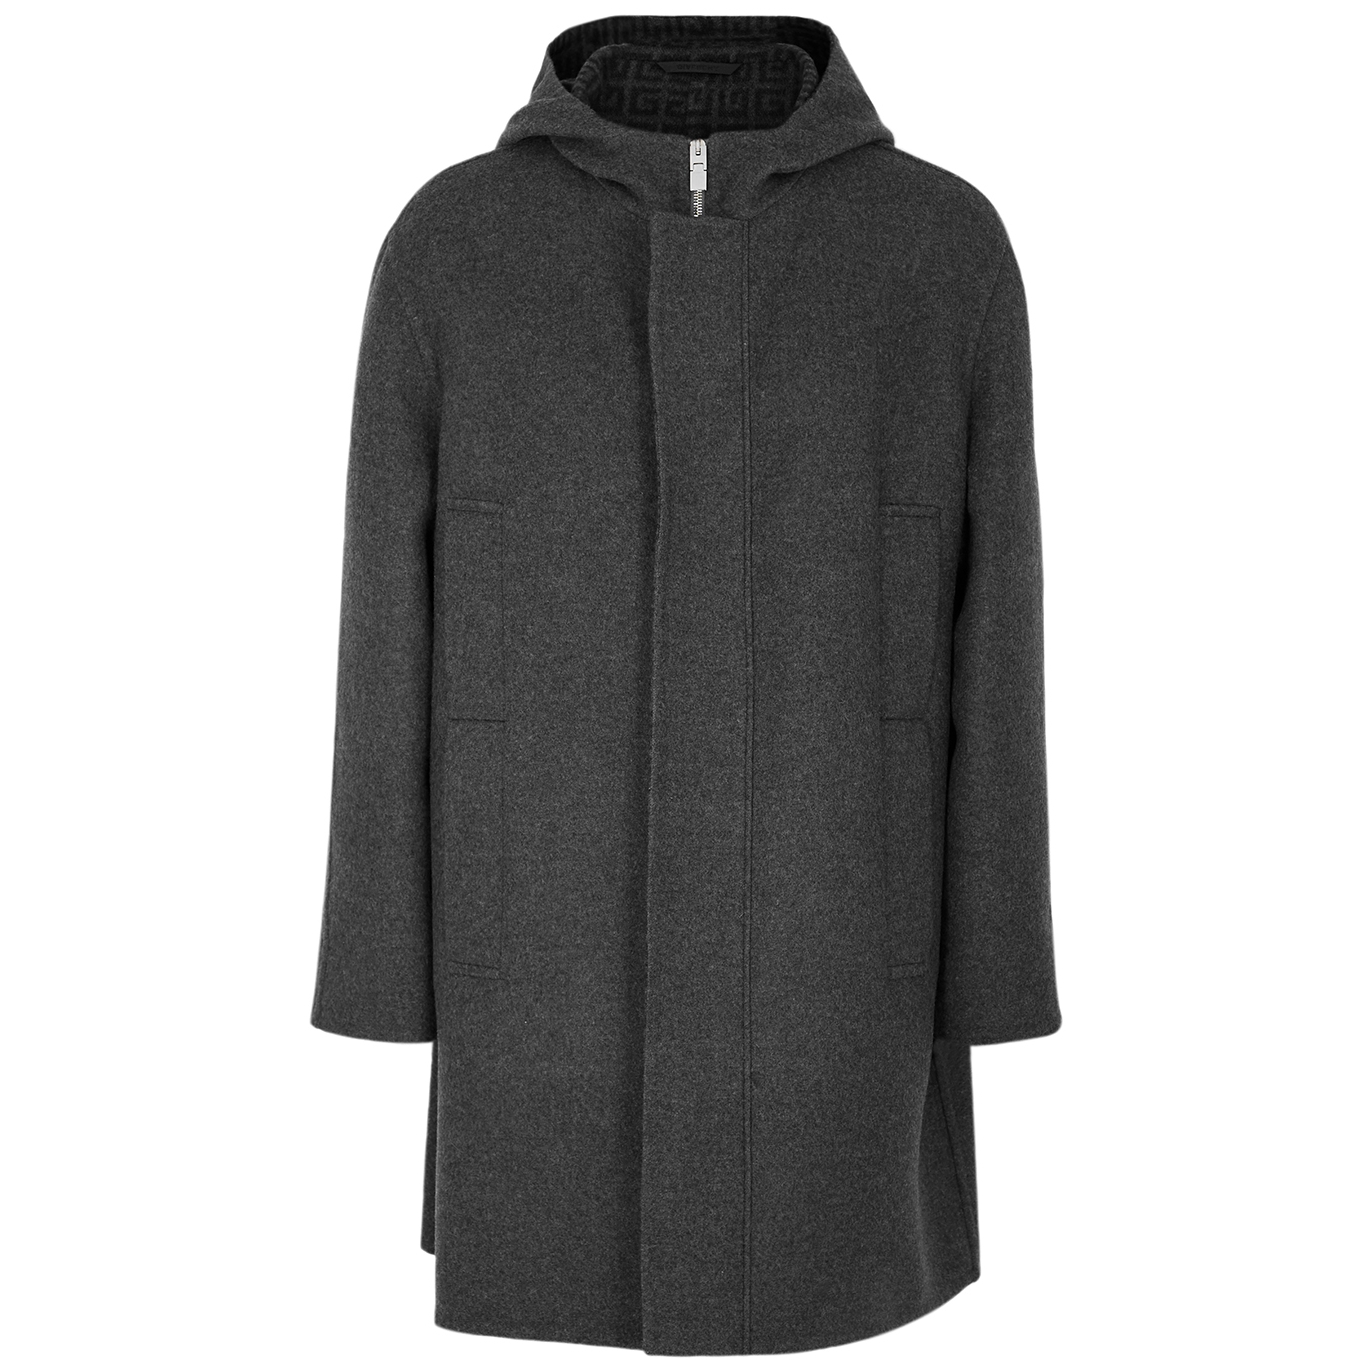 Givenchy Grey Hooded Wool-blend Coat - 48